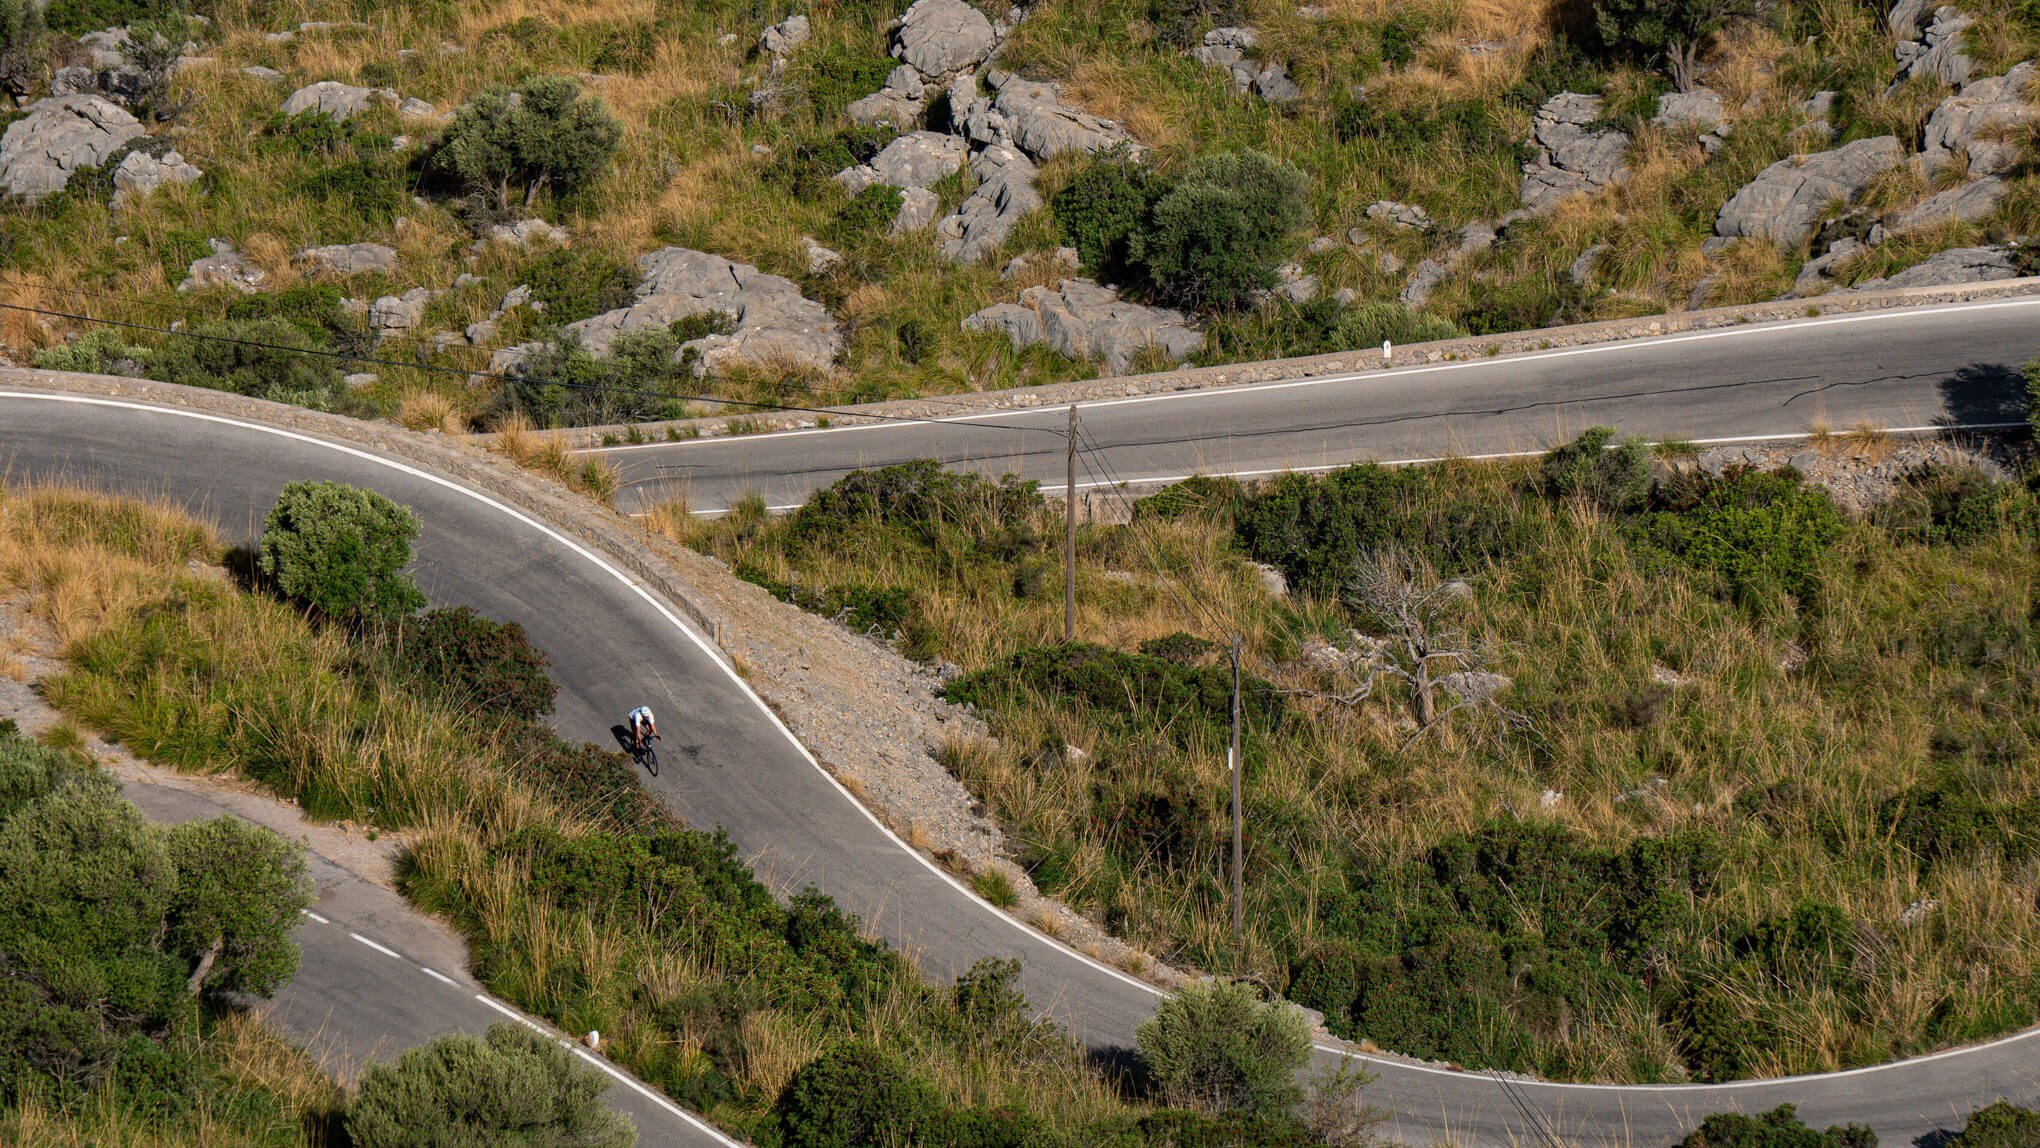 This road is all about hairpins!